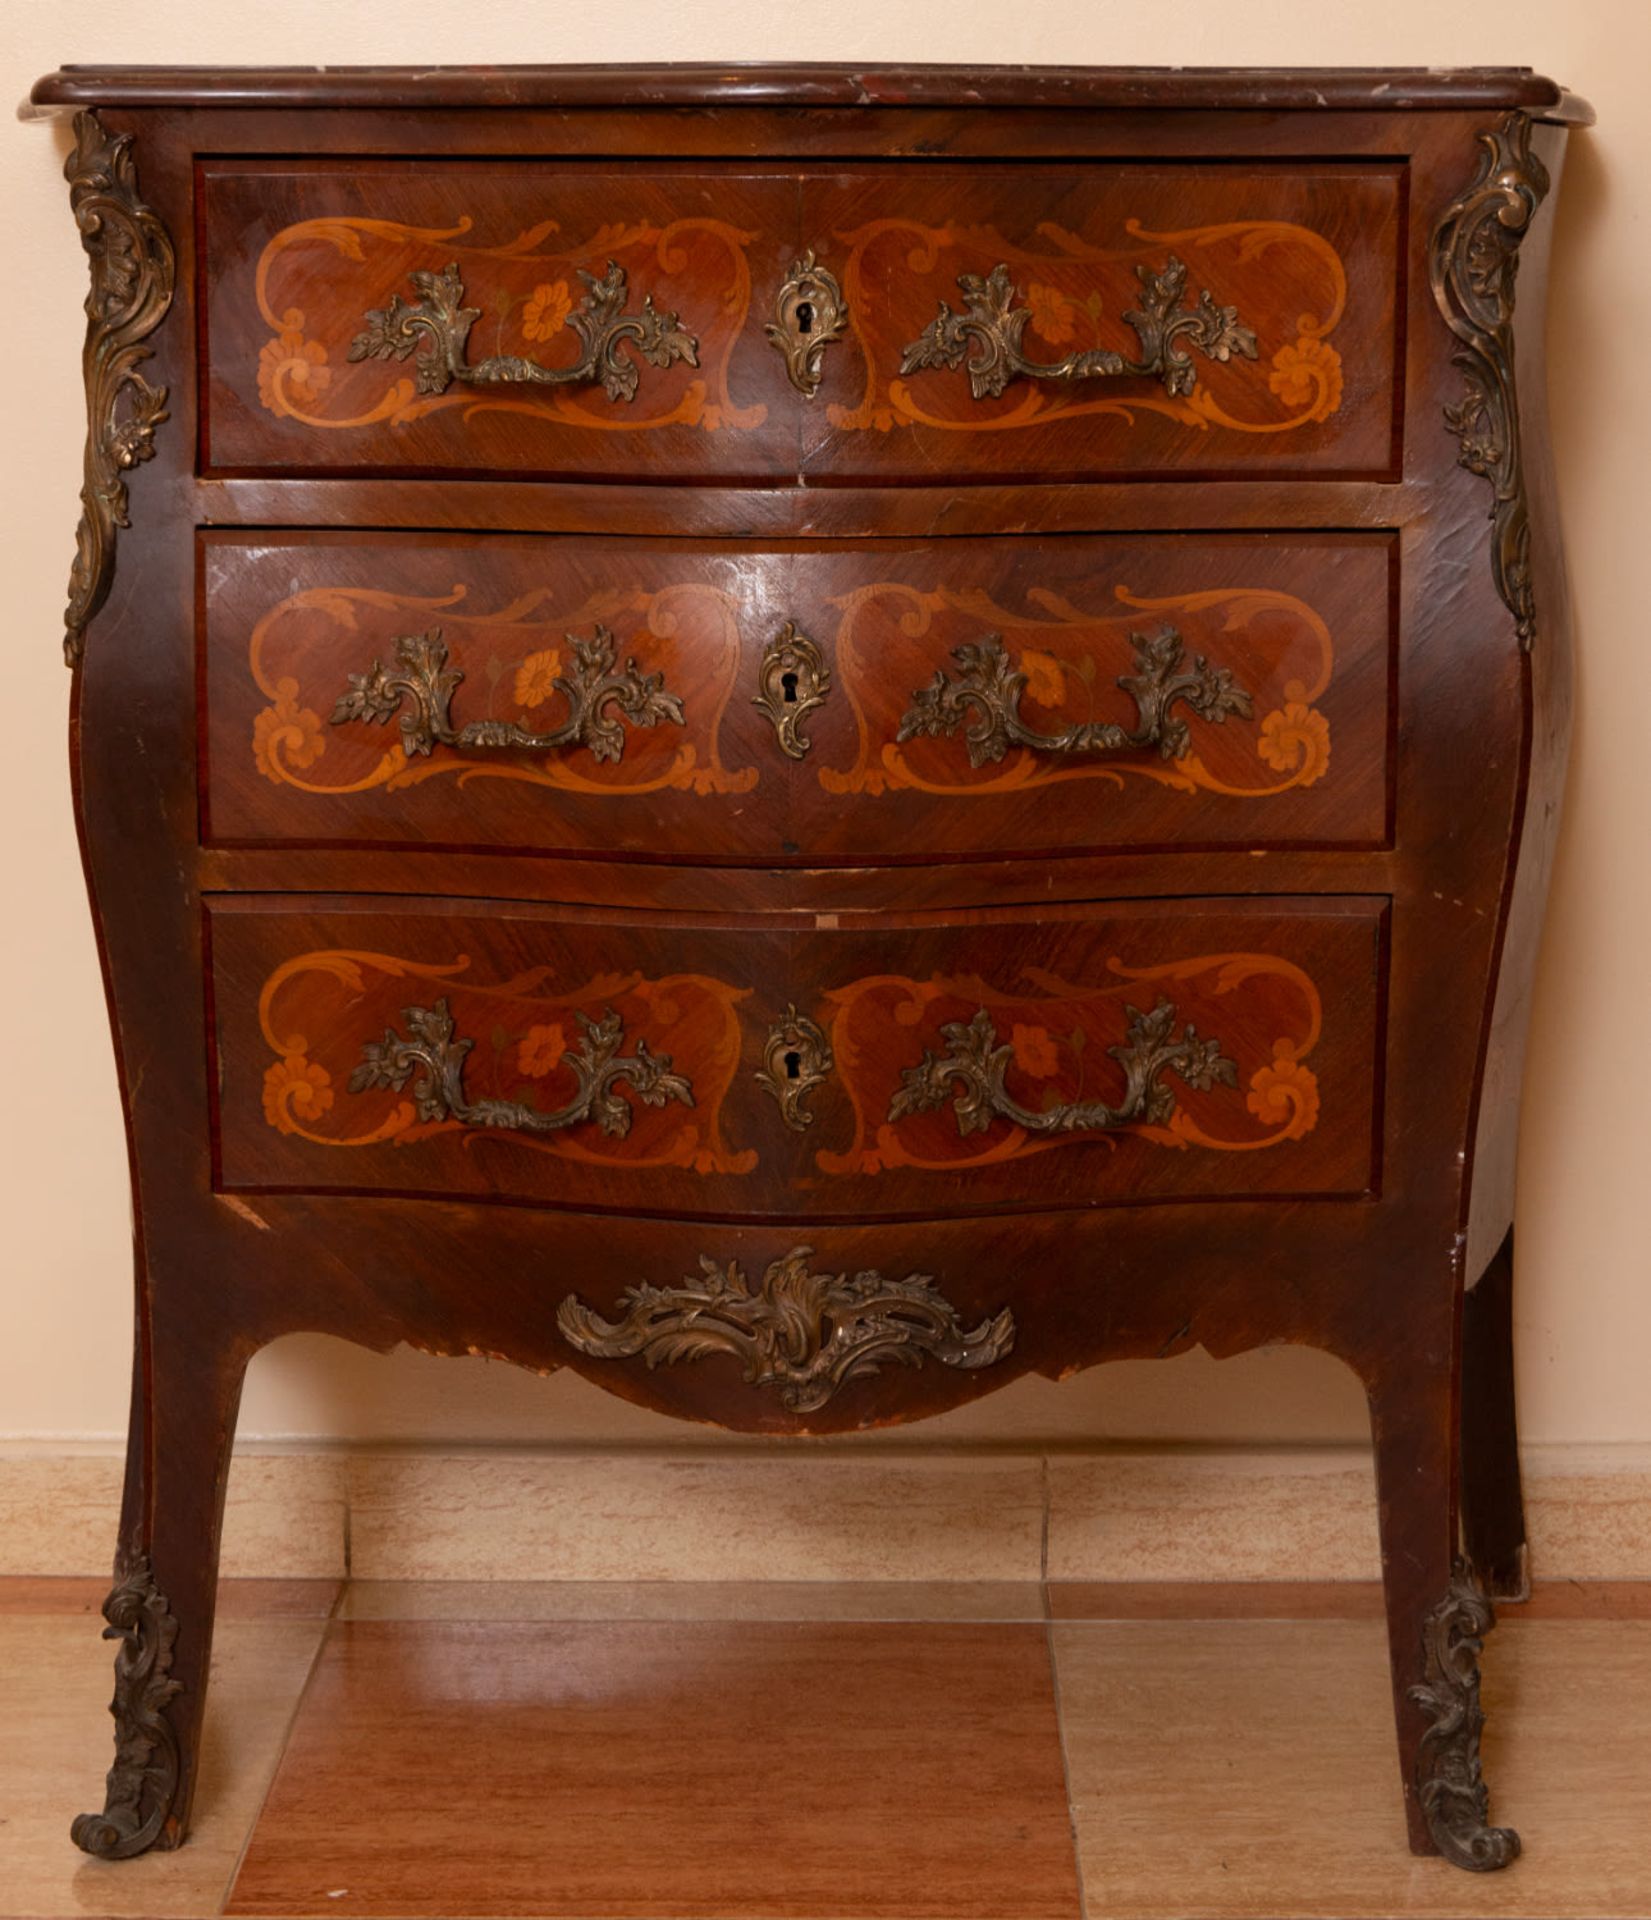 Elegant Louis XV style chest of drawers from the 19th century in fruit marquitry and gilt bronze